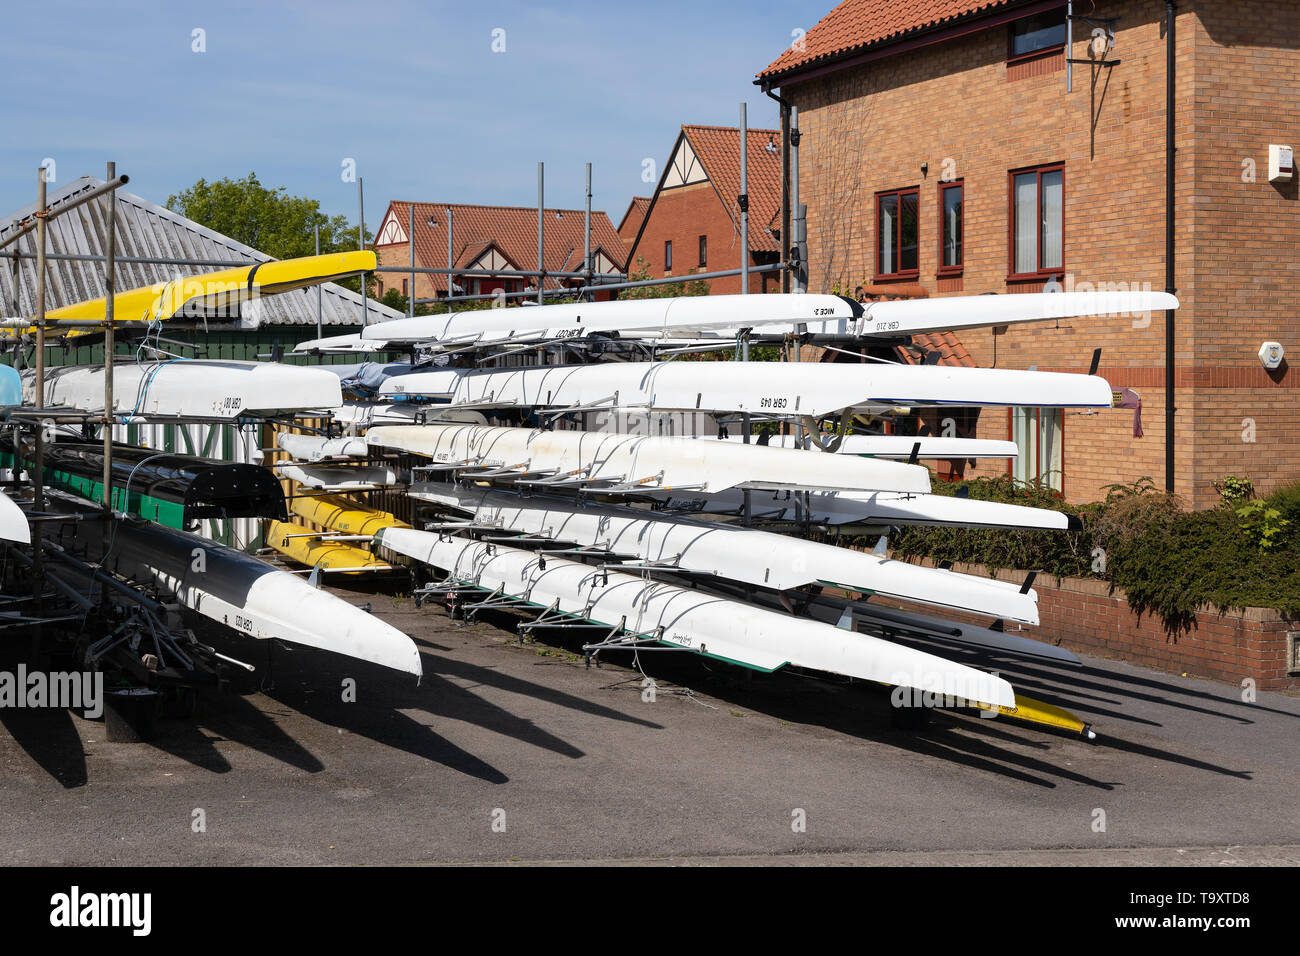 BRISTOL, UK - MAY 14 : Lots of skulling boats by the River Avon in Bristol on May 14, 2019. Stock Photo